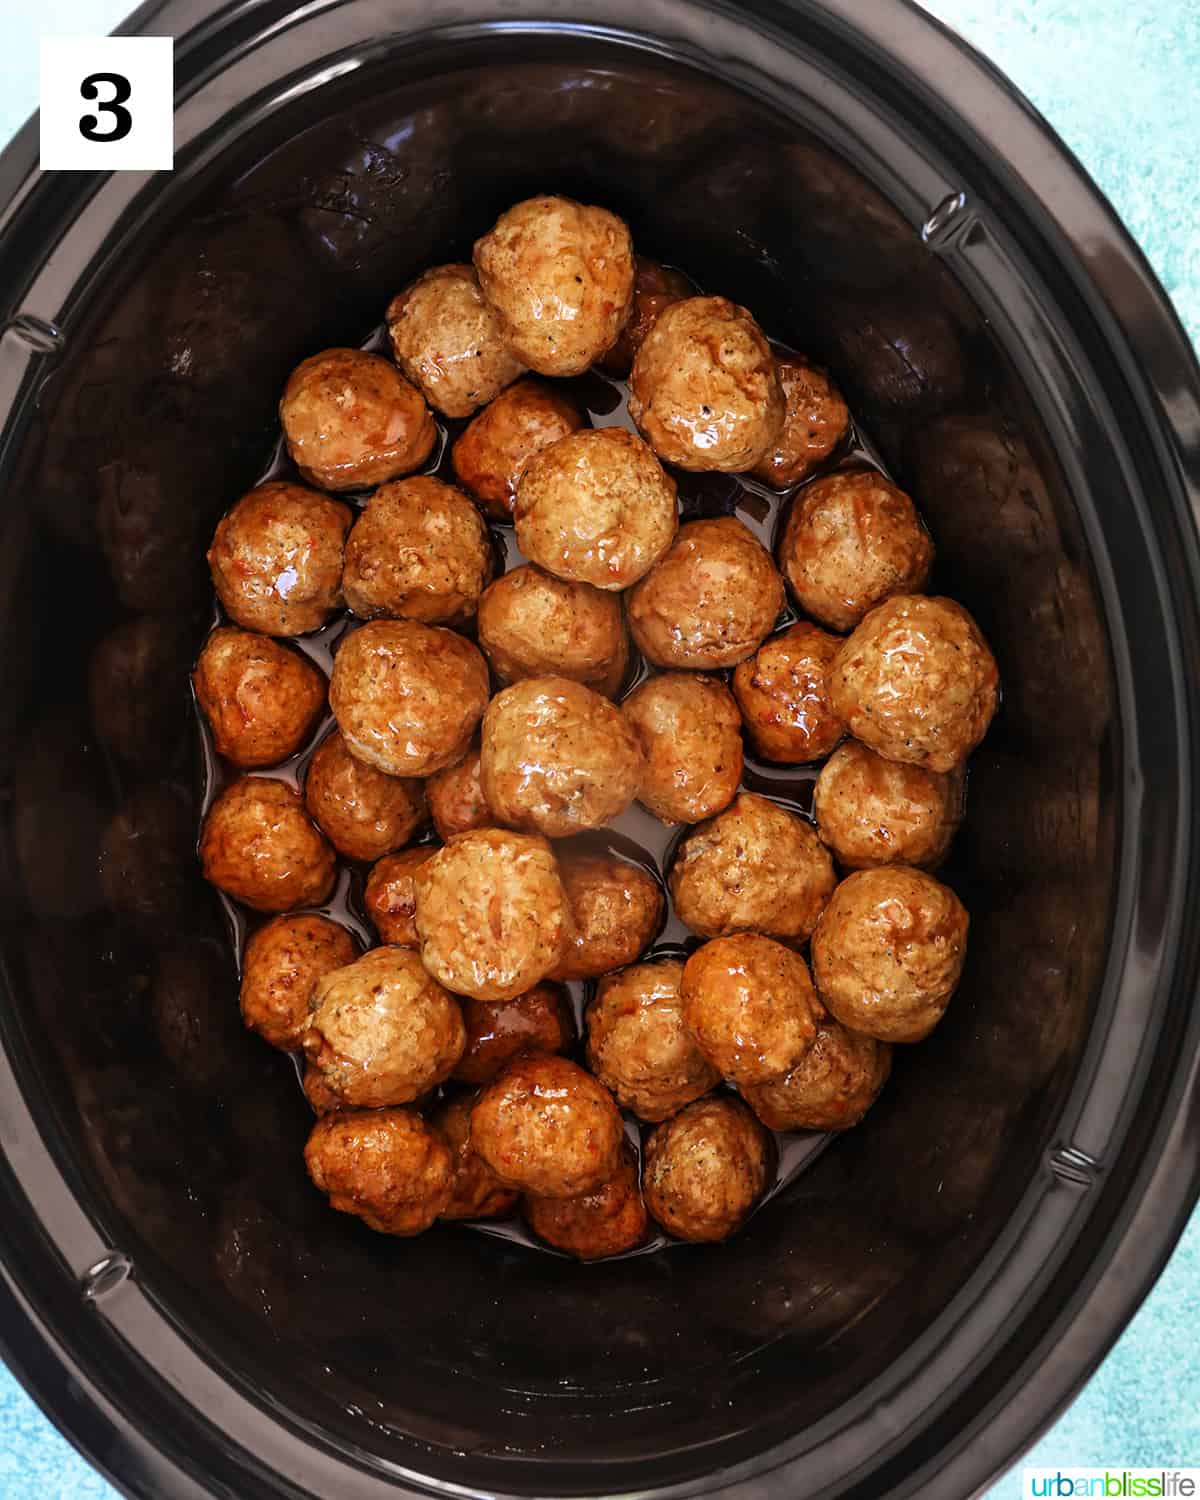 sauce poured over dozens of meatballs in a slow cooker.